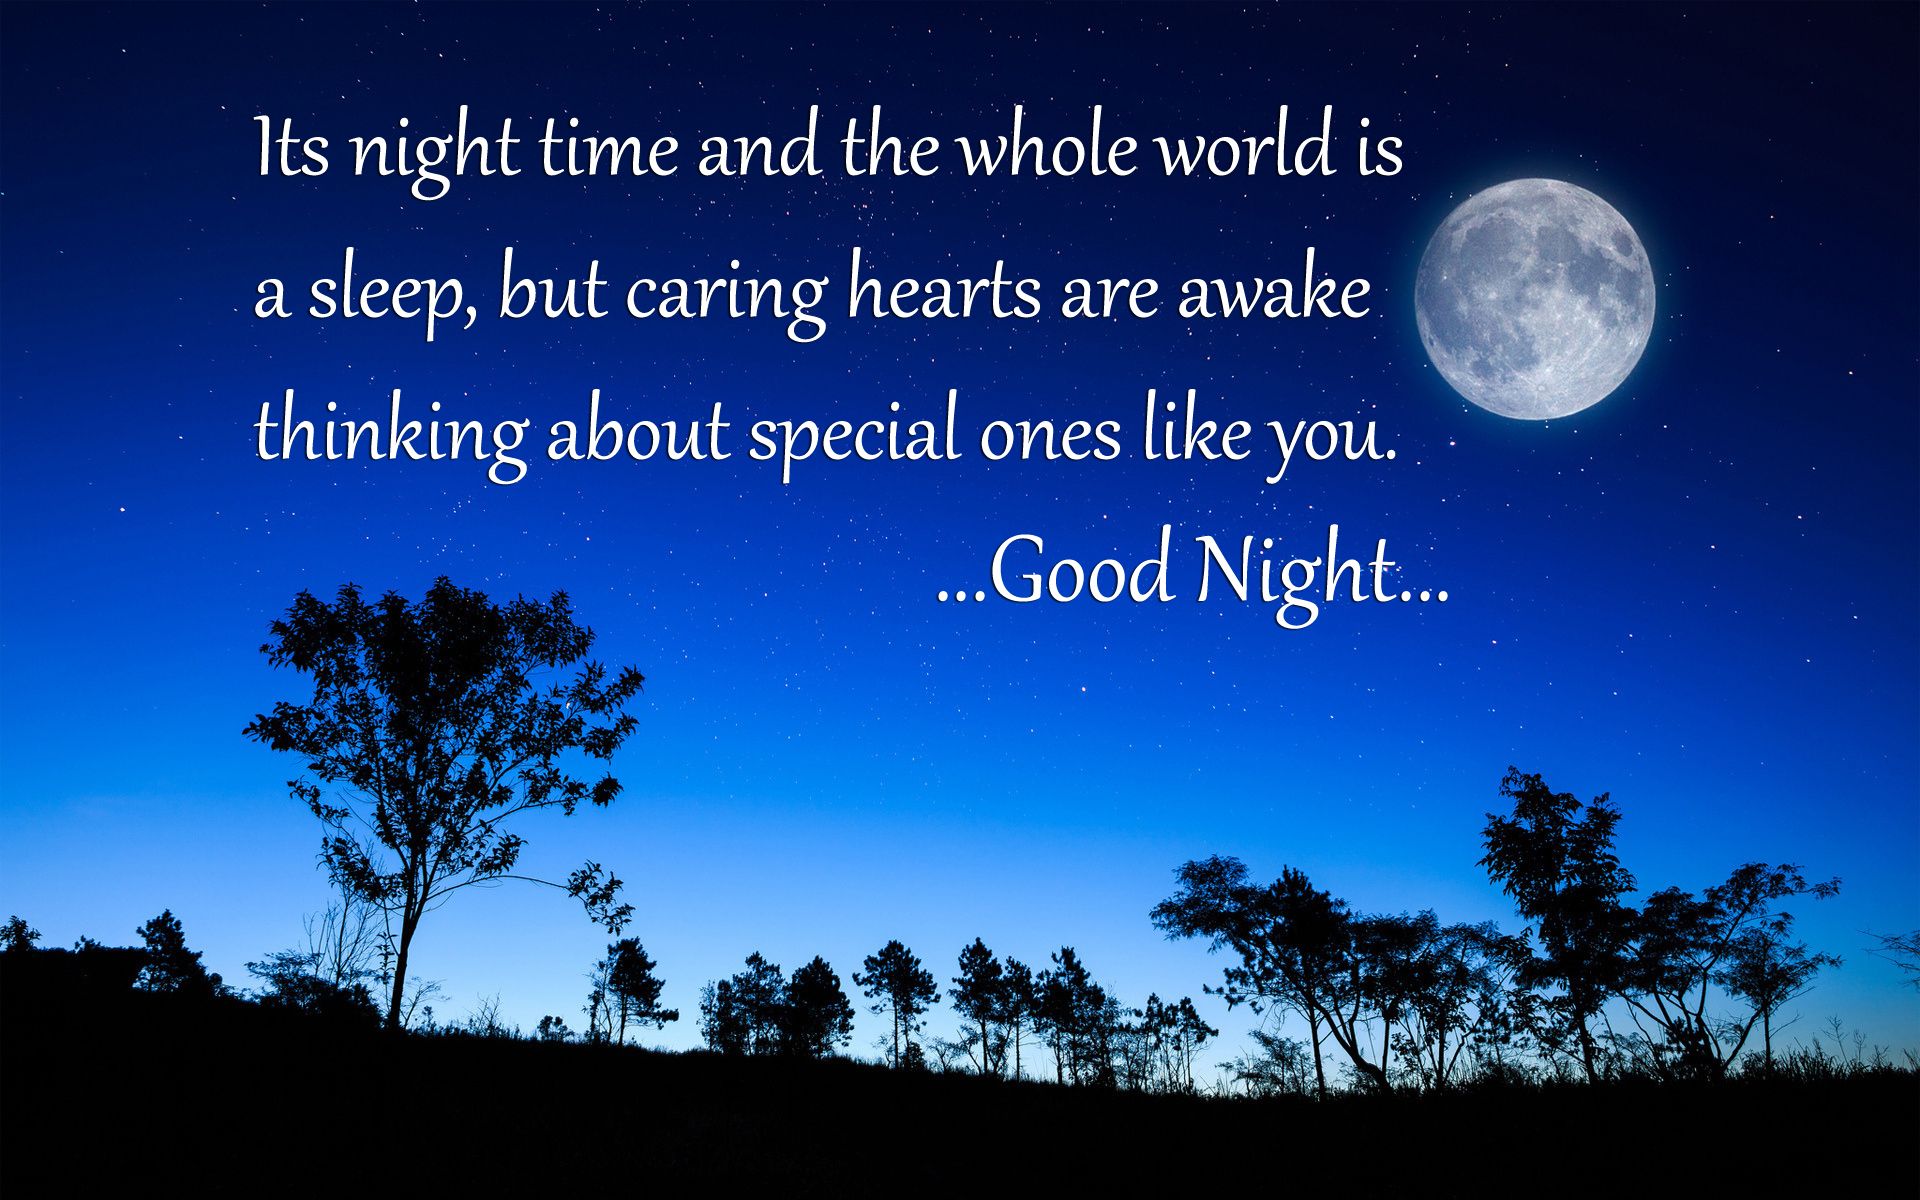 Good Night Quotes Wallpapers - Wallpaper Cave